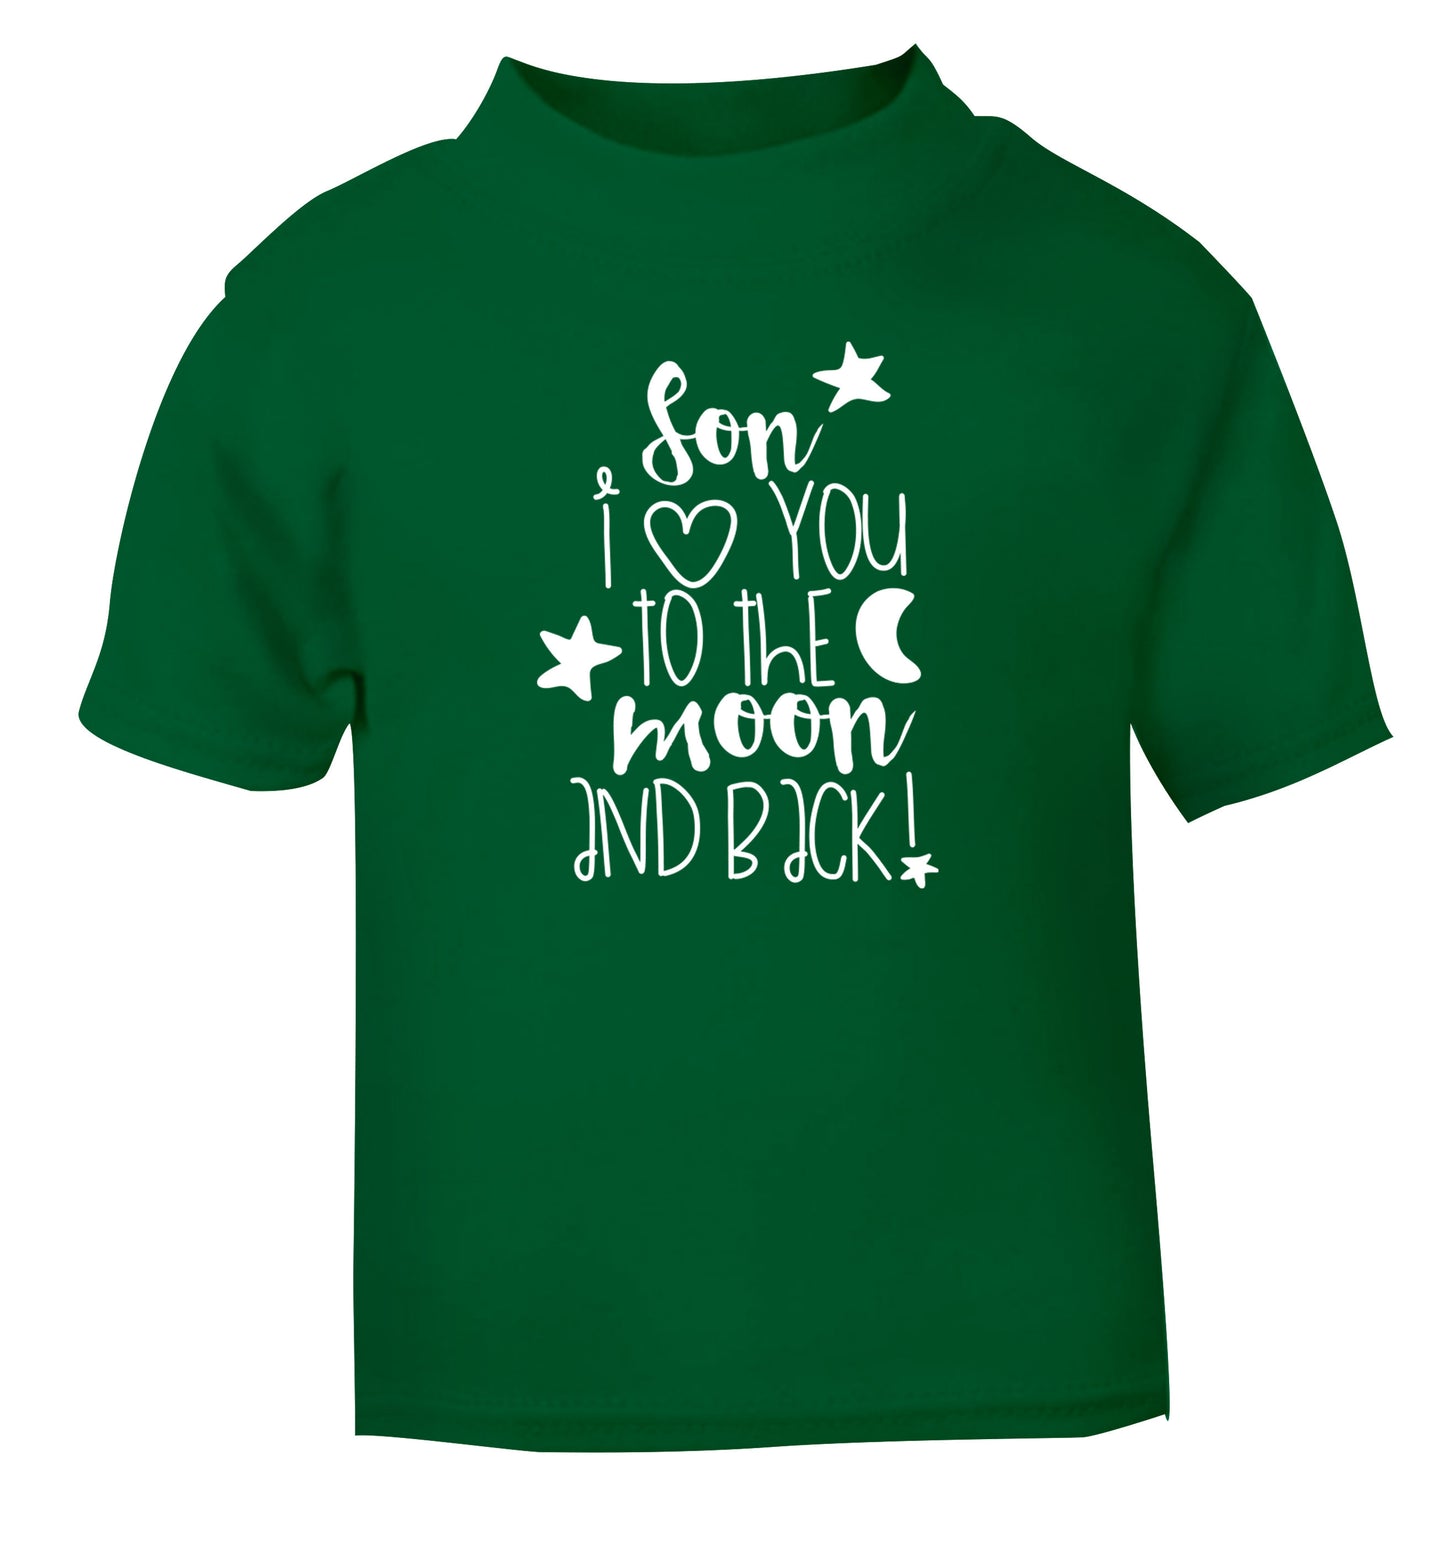 Son I love you to the moon and back green Baby Toddler Tshirt 2 Years